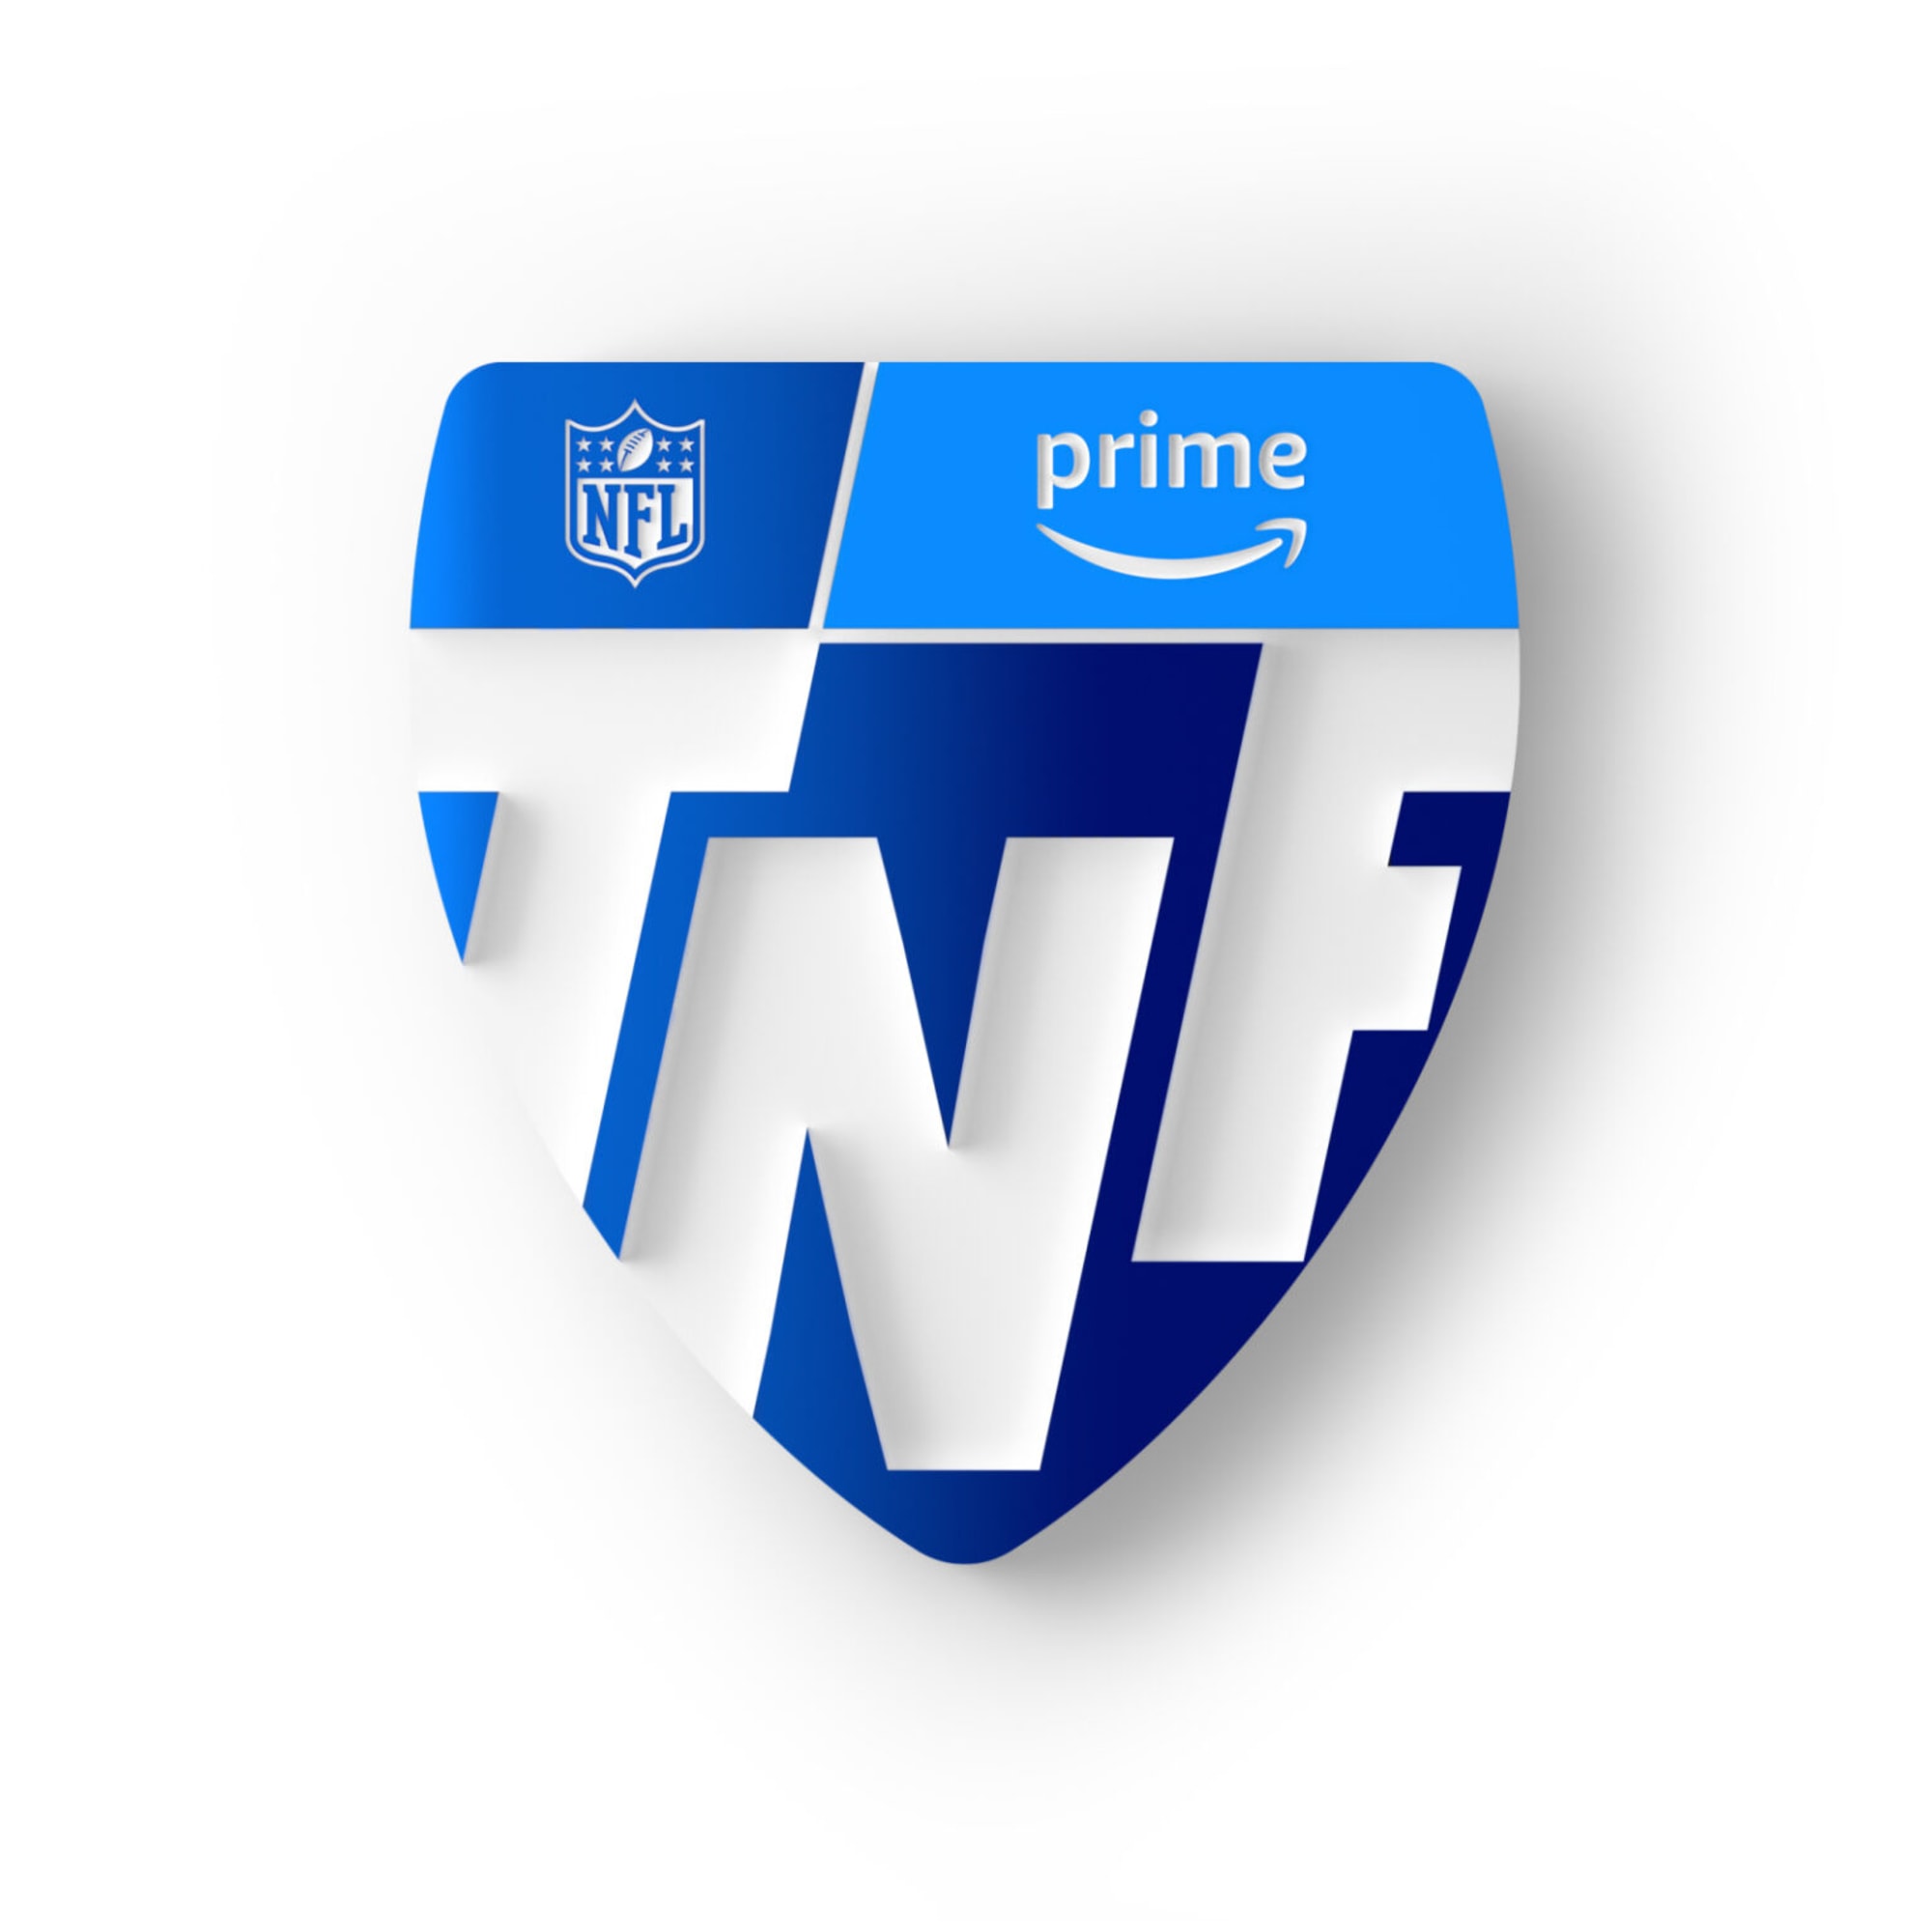 nfl and prime